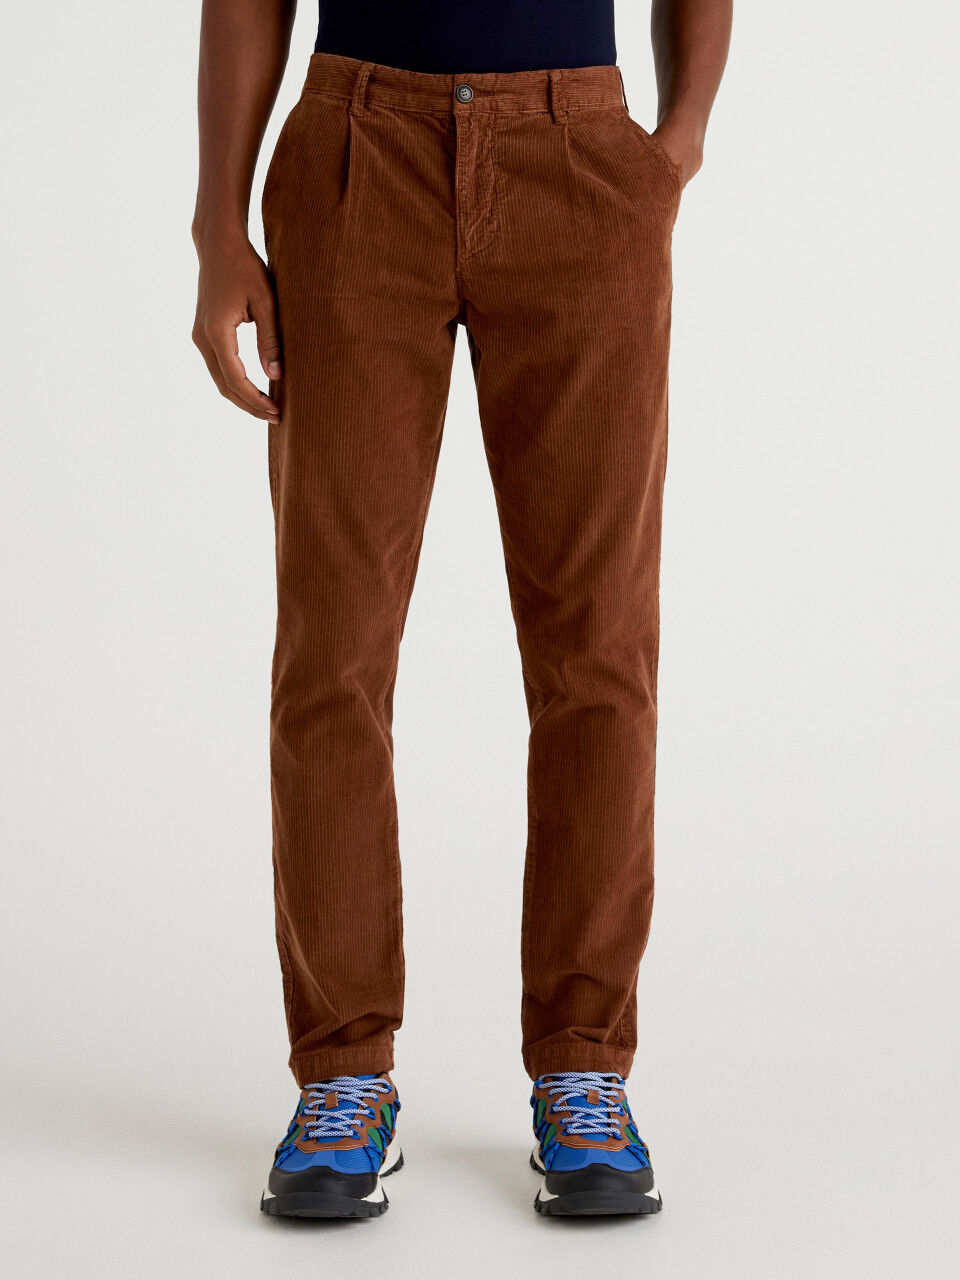 United Colors of Benetton Casual Trousers  Buy United Colors of Benetton  Men Grey Solid Slim Fit Casual Trouser Online  Nykaa Fashion